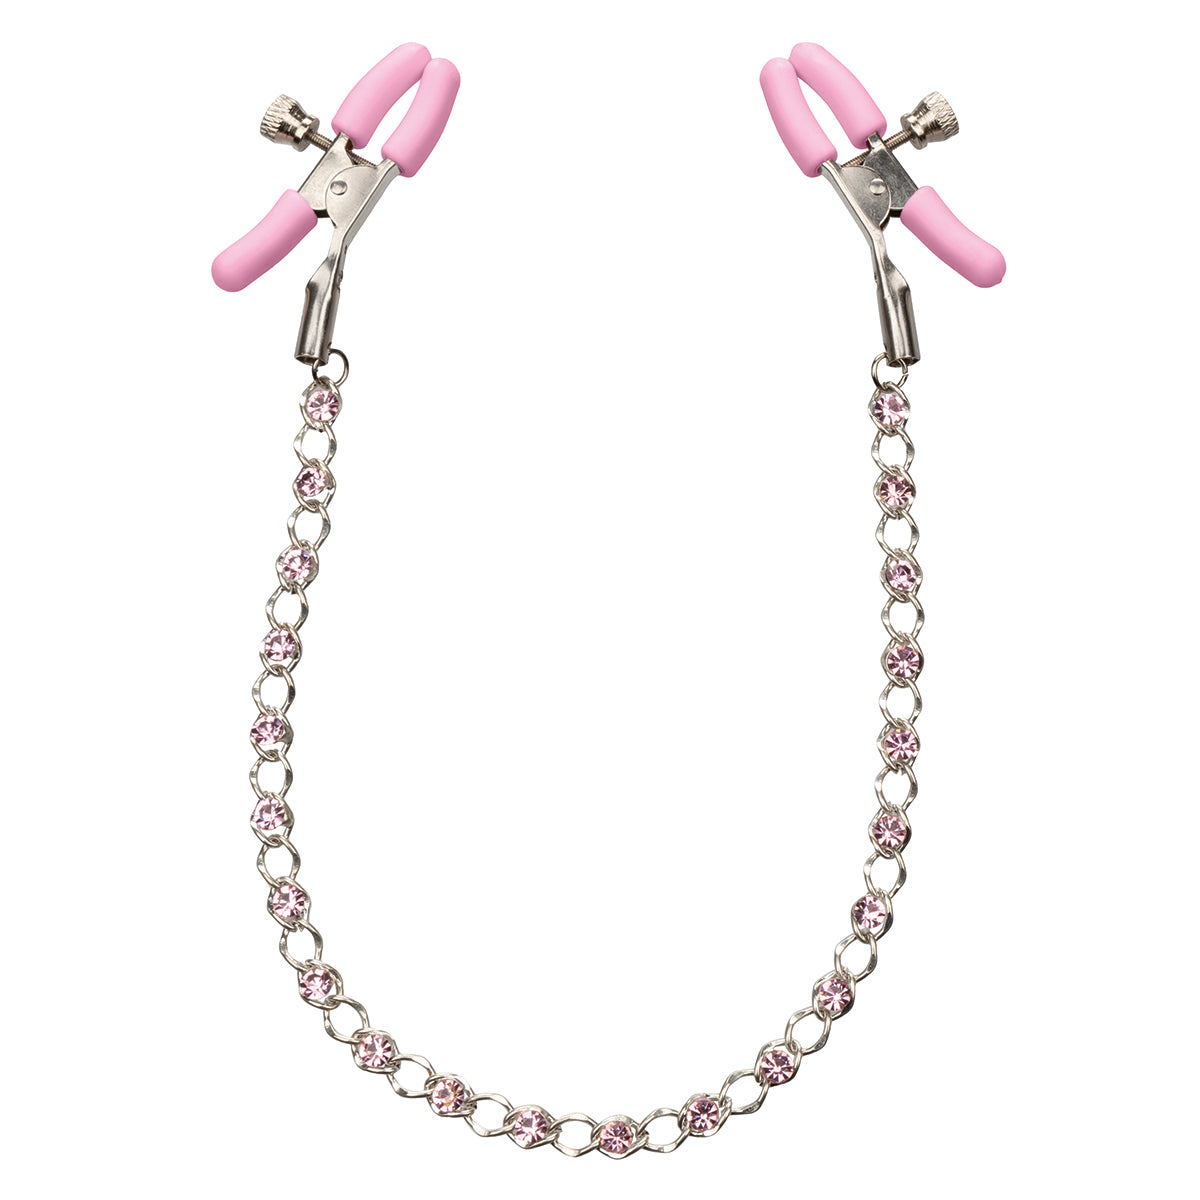 Calexotics - Nipple Play Crystal Chain Clamps - Pink